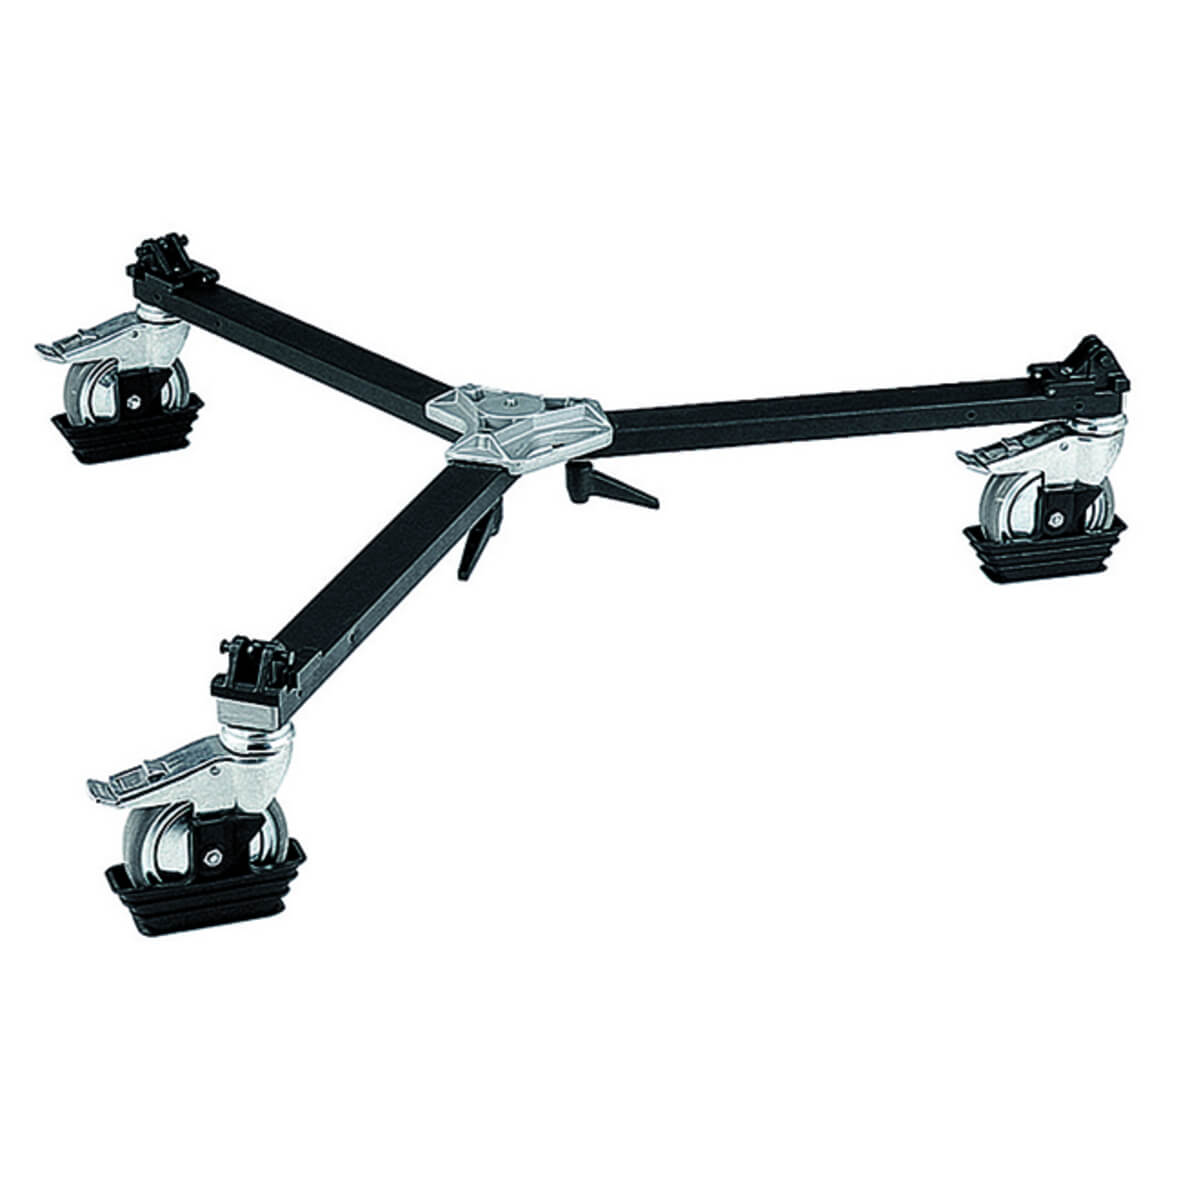 114MV Tripod Trolley for trip ods with double-spike foots